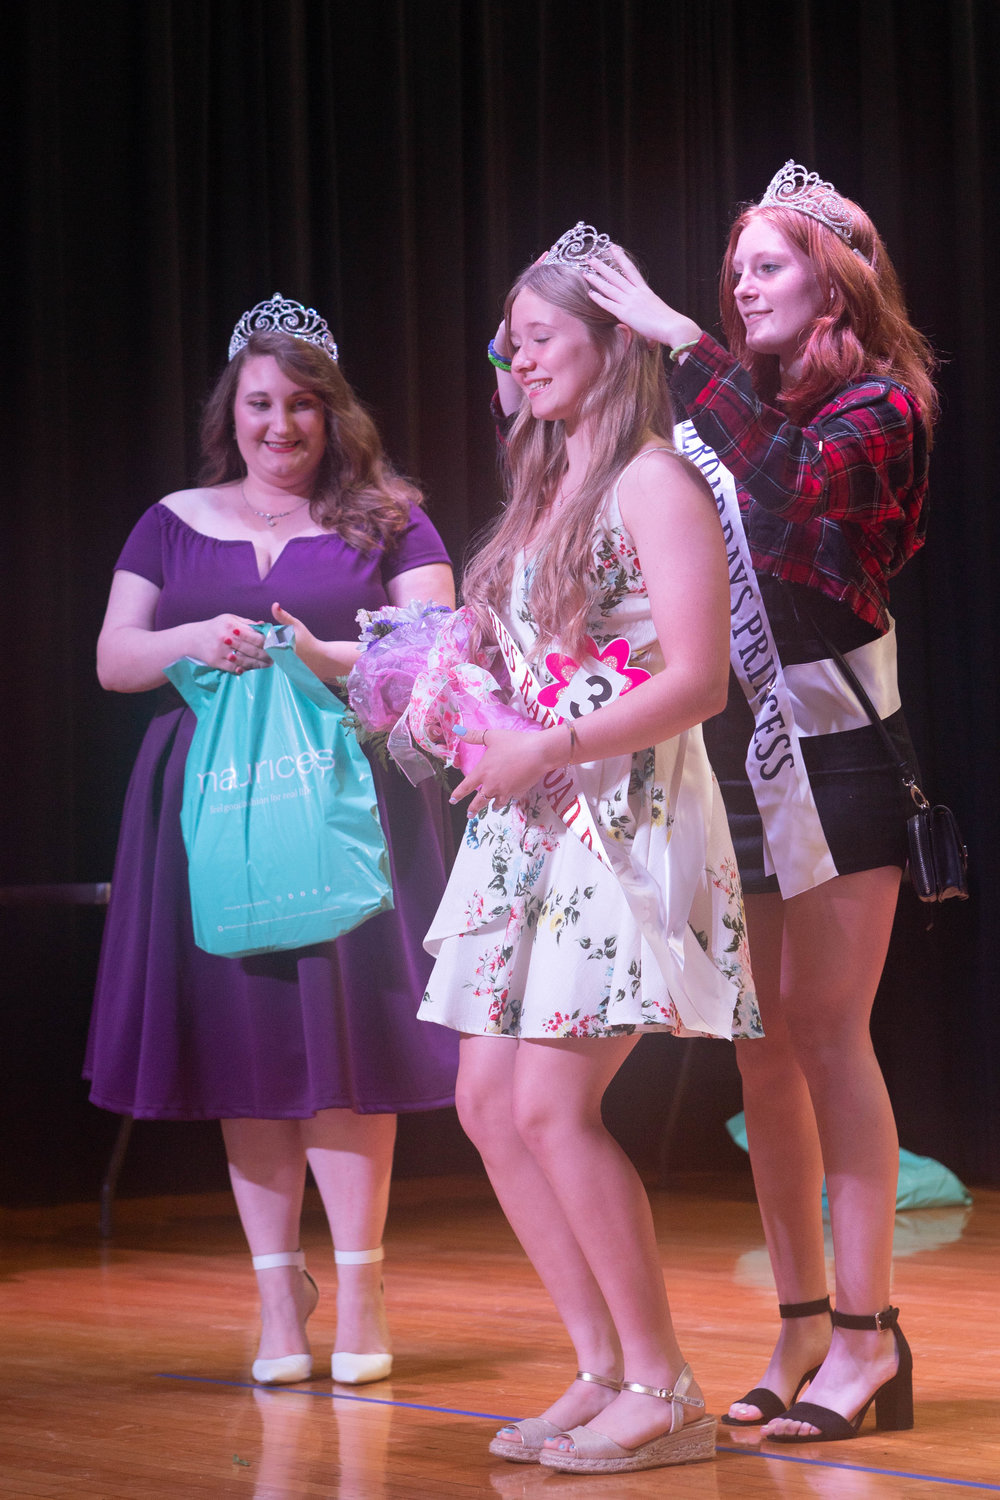 Junior Miss Railroad Days Kaleighia Brown is crowned by 2021 Princess Ashlyn Ancell as 2021 Miss Railroad Days Evelyn Ortman looks on.